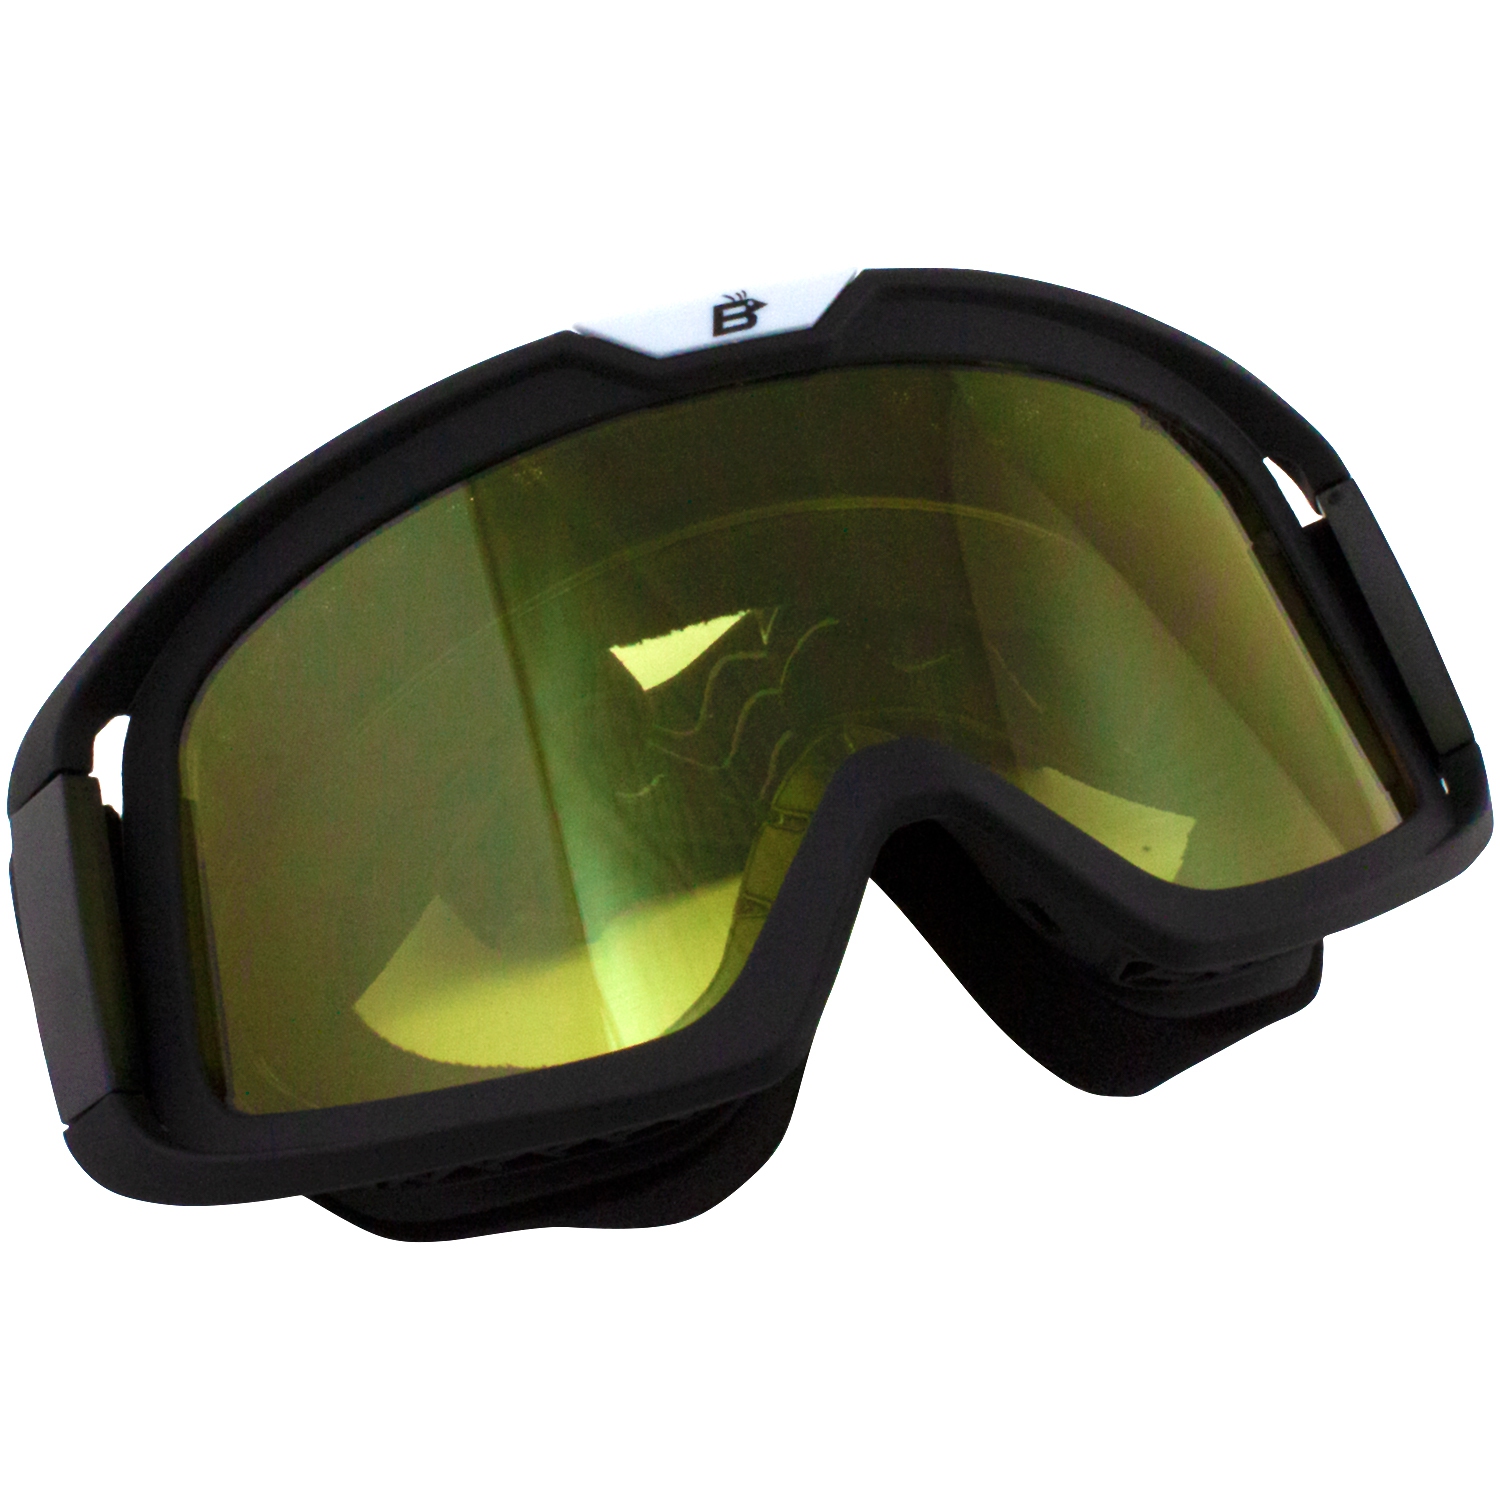 Birdz Pelican Black Fitover Padded Atv Motorcycle Otg Goggles With